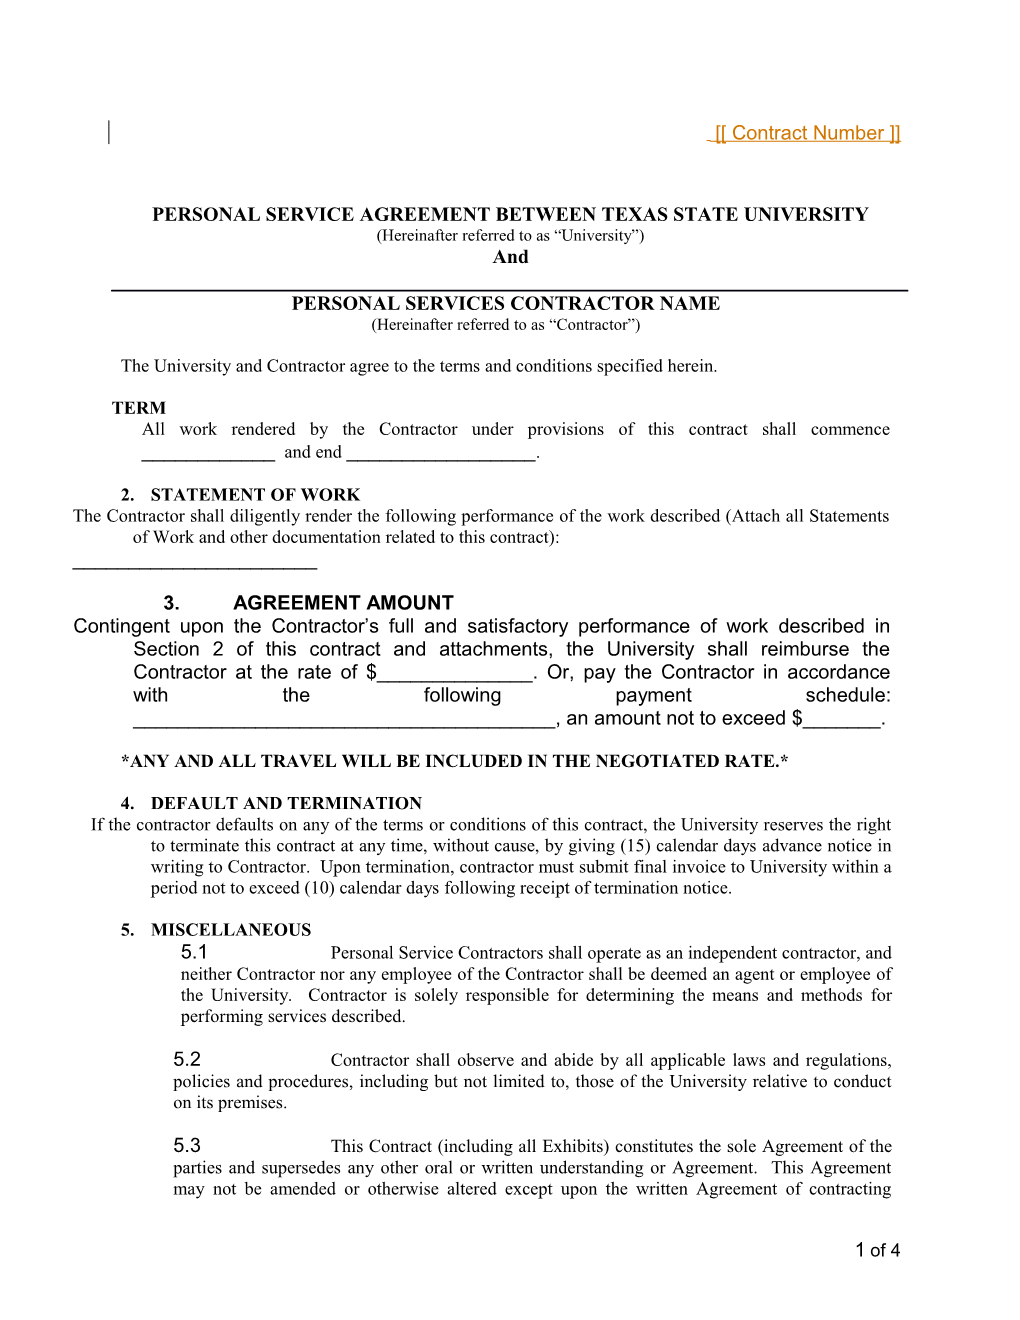 Personal Service Agreement Between Texas State University